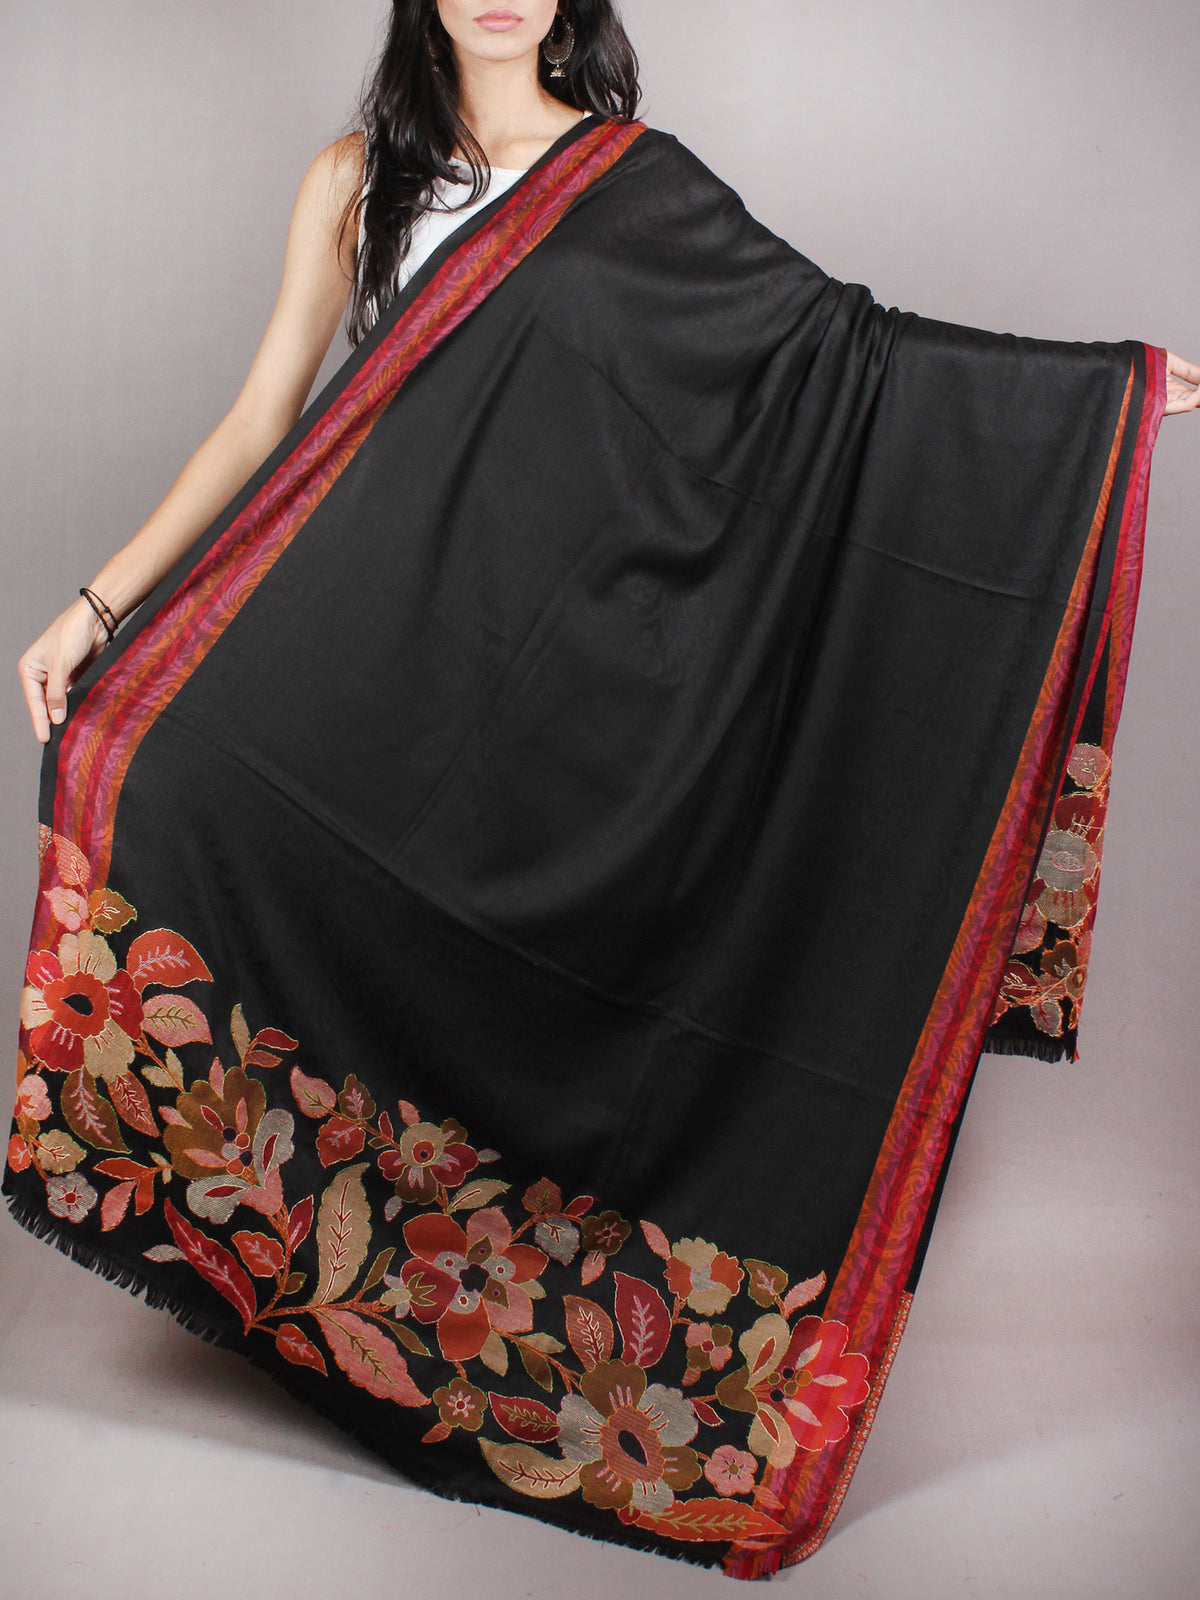 Black Brown Maroon Cashmere Shawl in Paisley-Self With Sozni Border From Kashmir - S200201